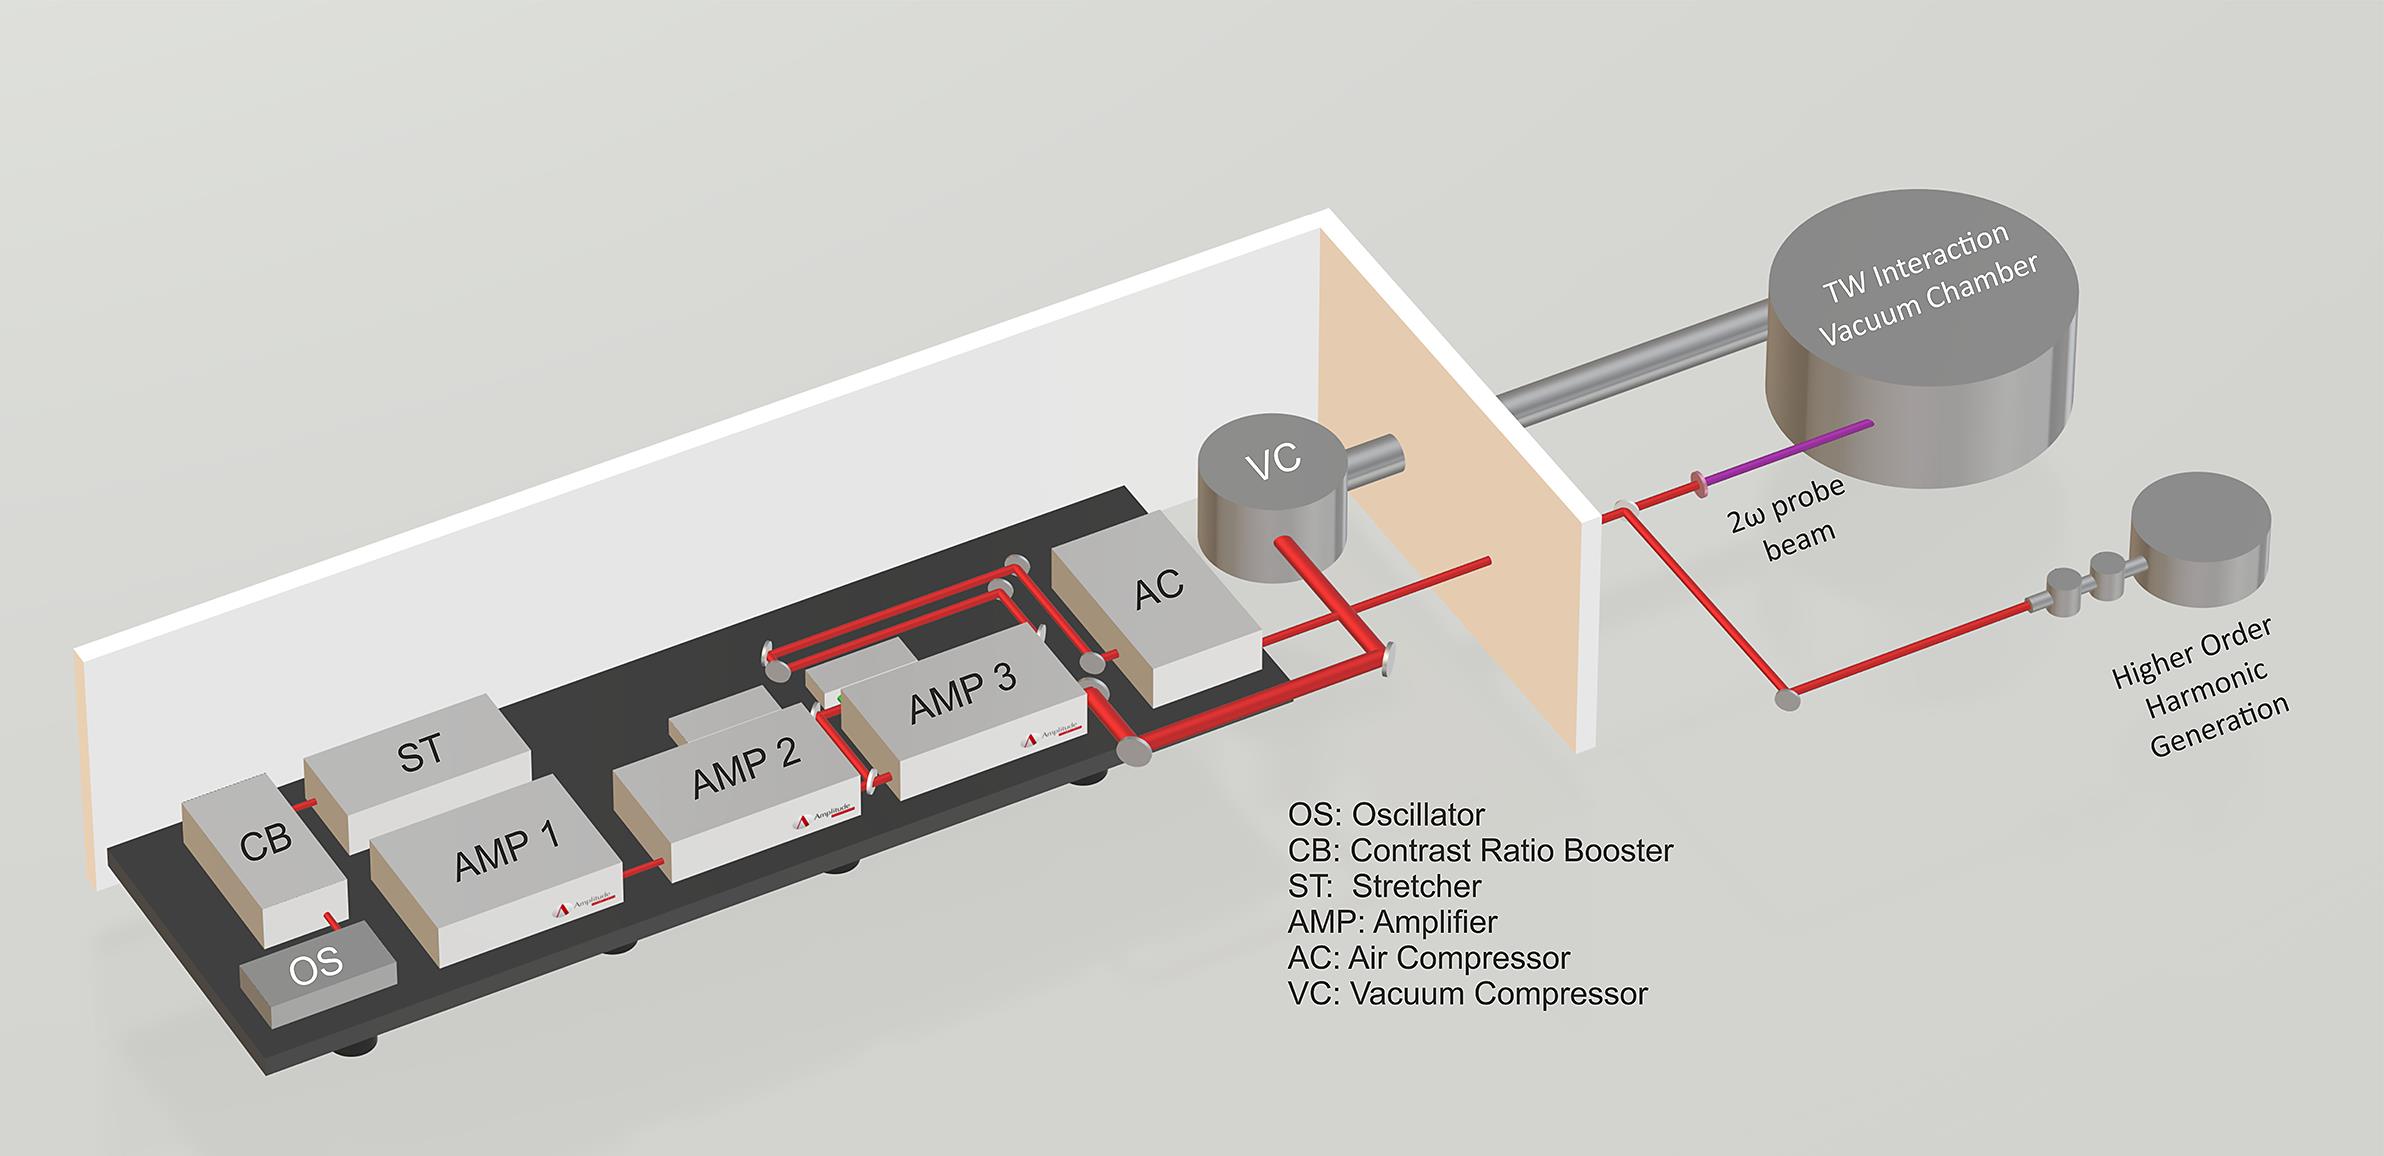 A 3D schematic layout of the ZEUS 45 TW laser system.